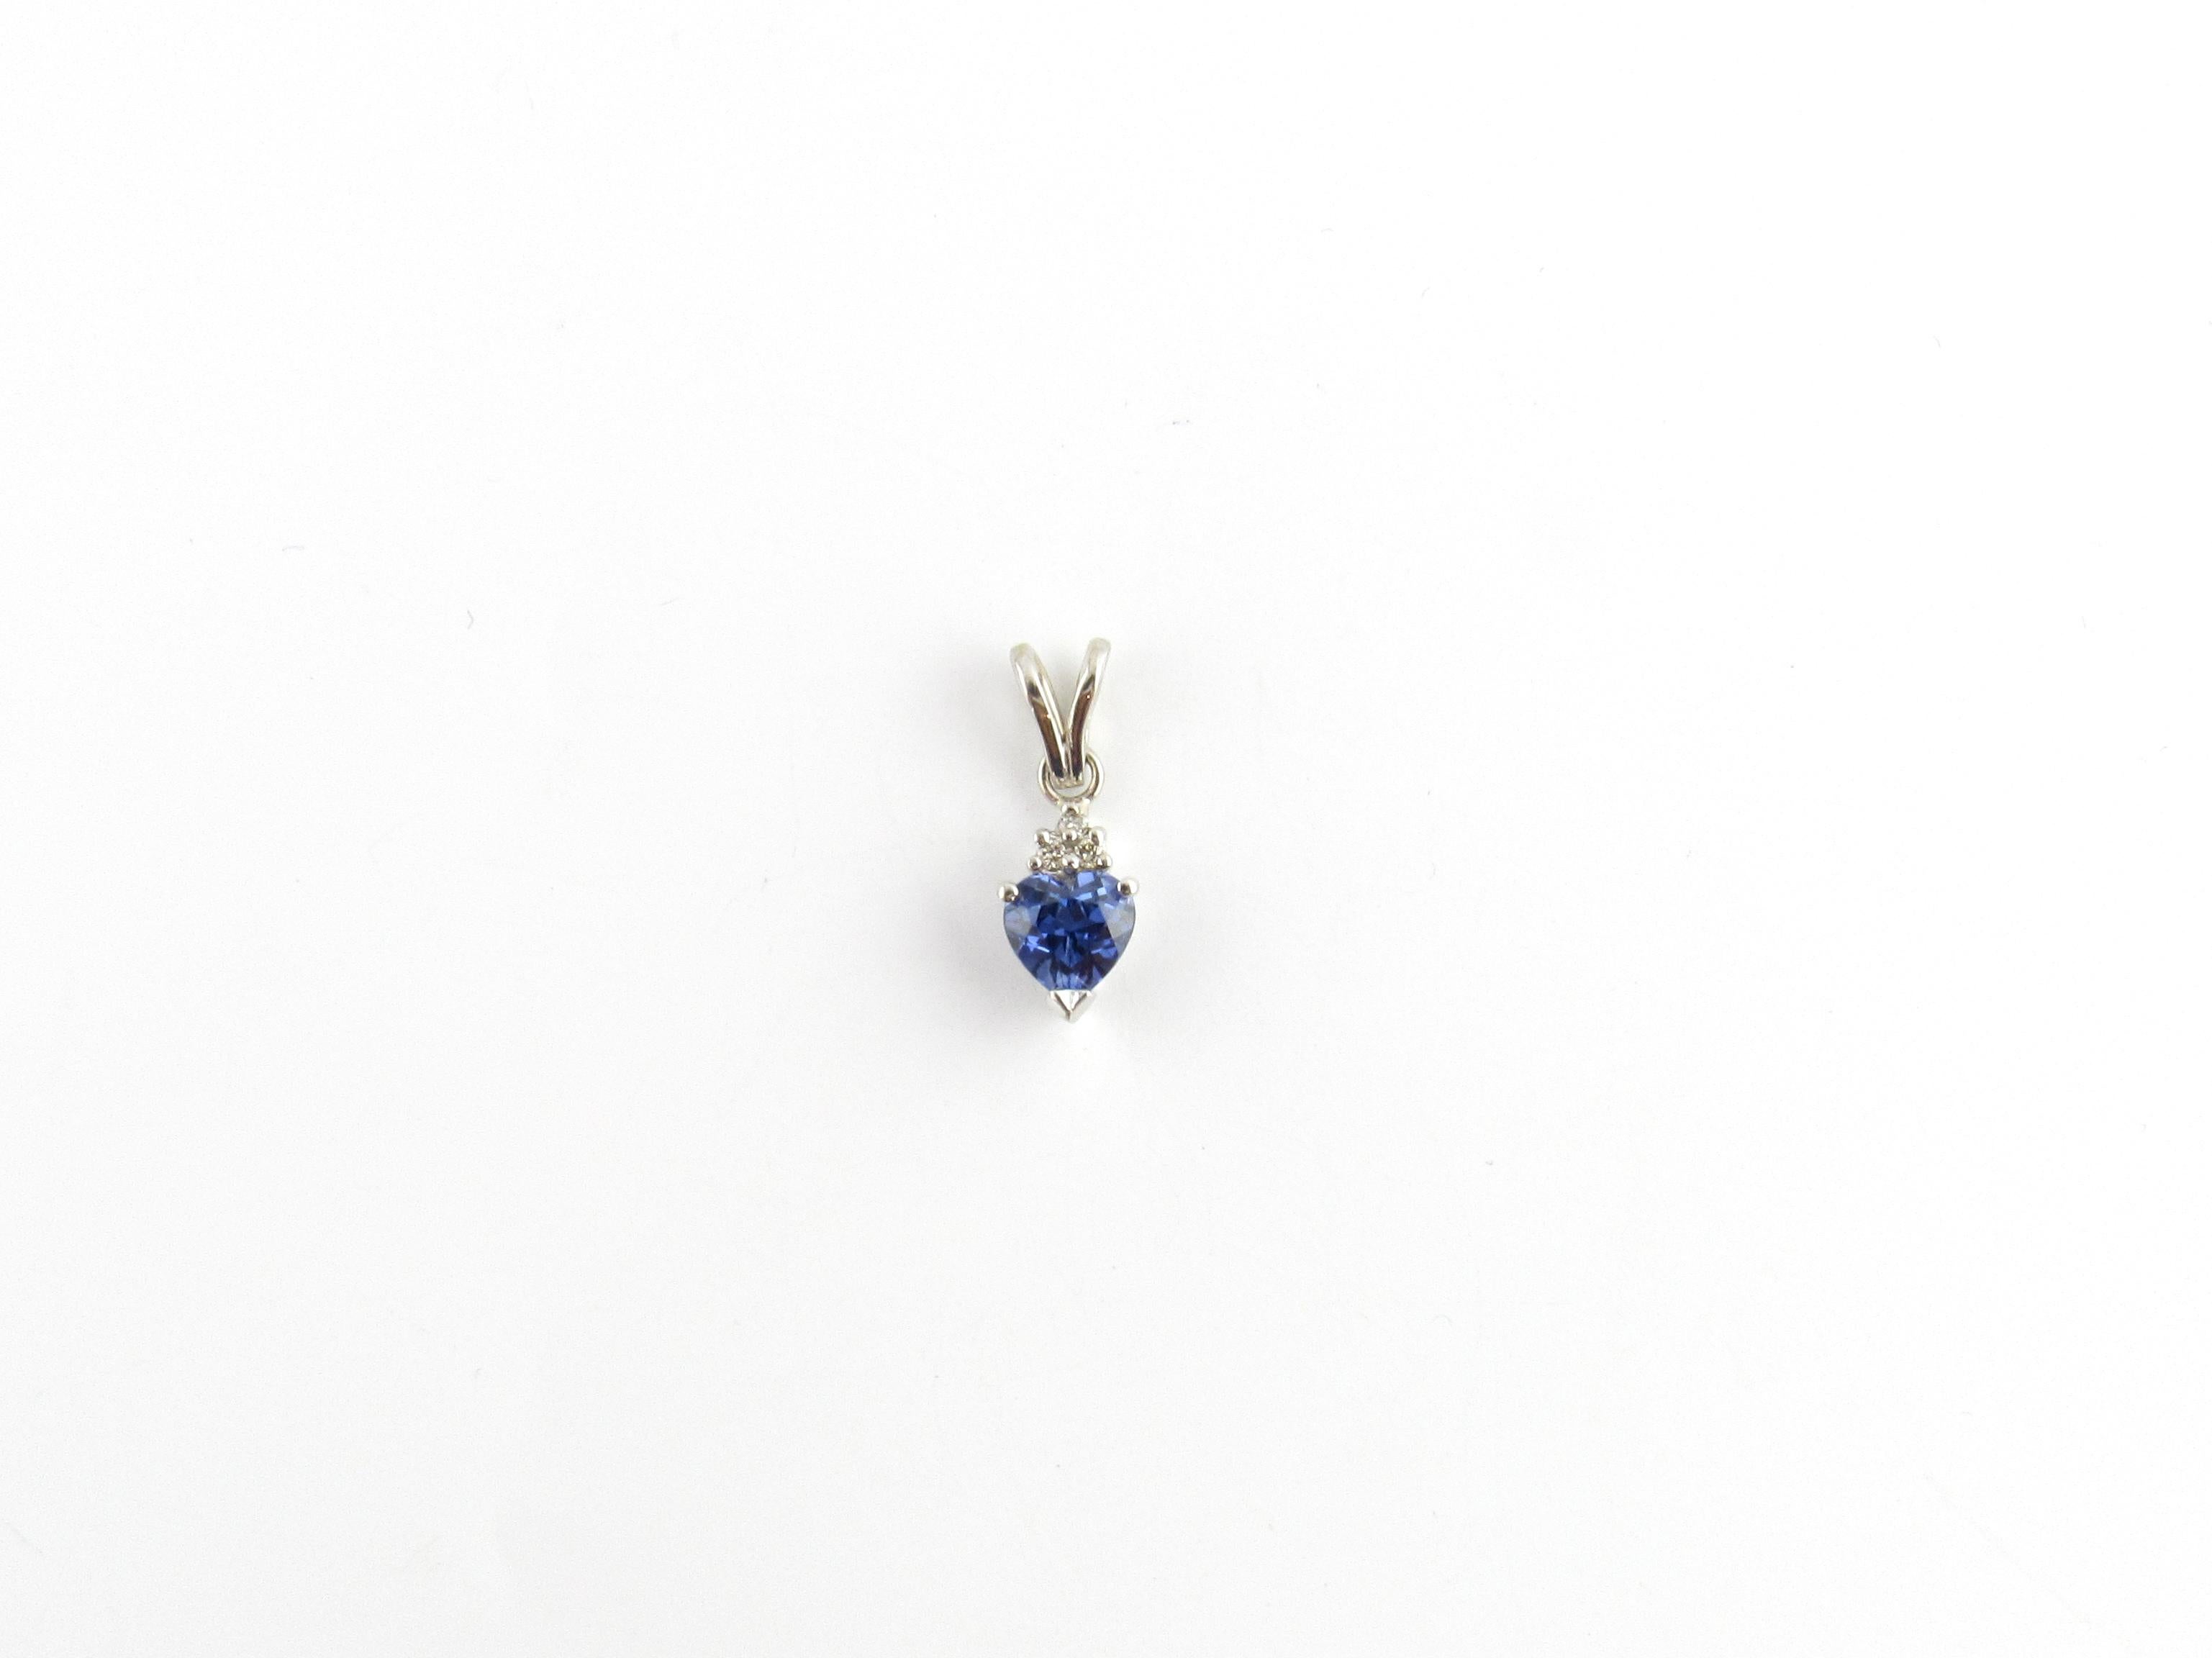 Vintage 14 Karat White Gold Tanzanite and Diamond Pendant

This lovely pendant features one heart shaped tanzanite (7 mm x 6 mm) and three round brilliant cut diamonds set in classic 14K white gold.

Size: 18 mm x 7 mm

Weight: 0.7 dwt. / 1.1